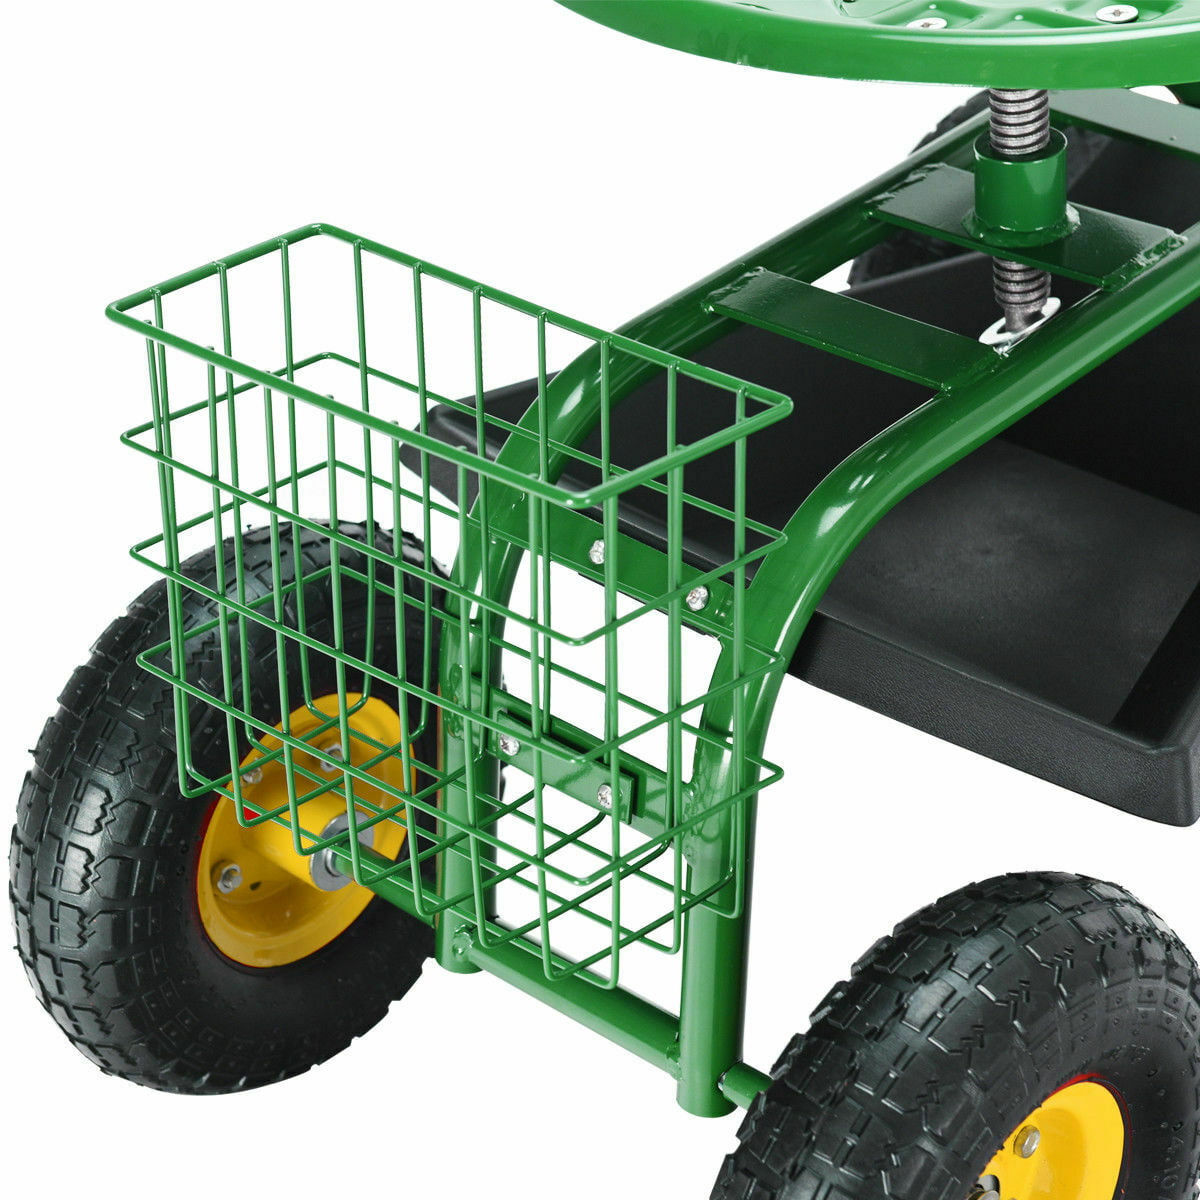 Green Elesuli Garden Cart Rolling Tray Gardening Tools Planting with Work Seat and Wheels Basket 